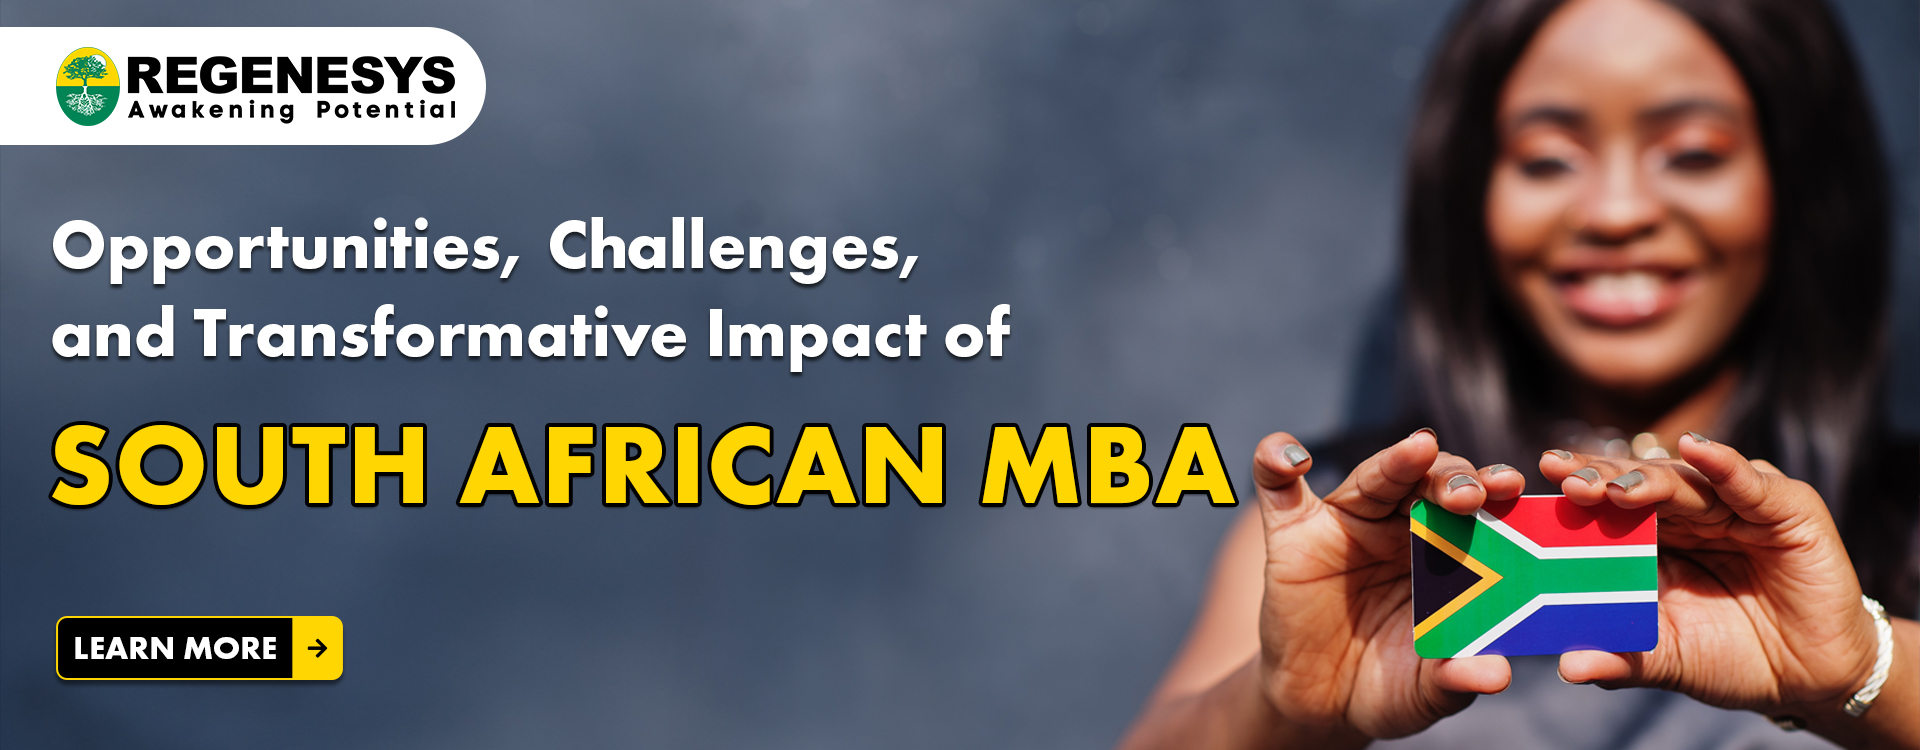 Opportunities, Challenges, and Transformative Impact of South African MBA | Know More